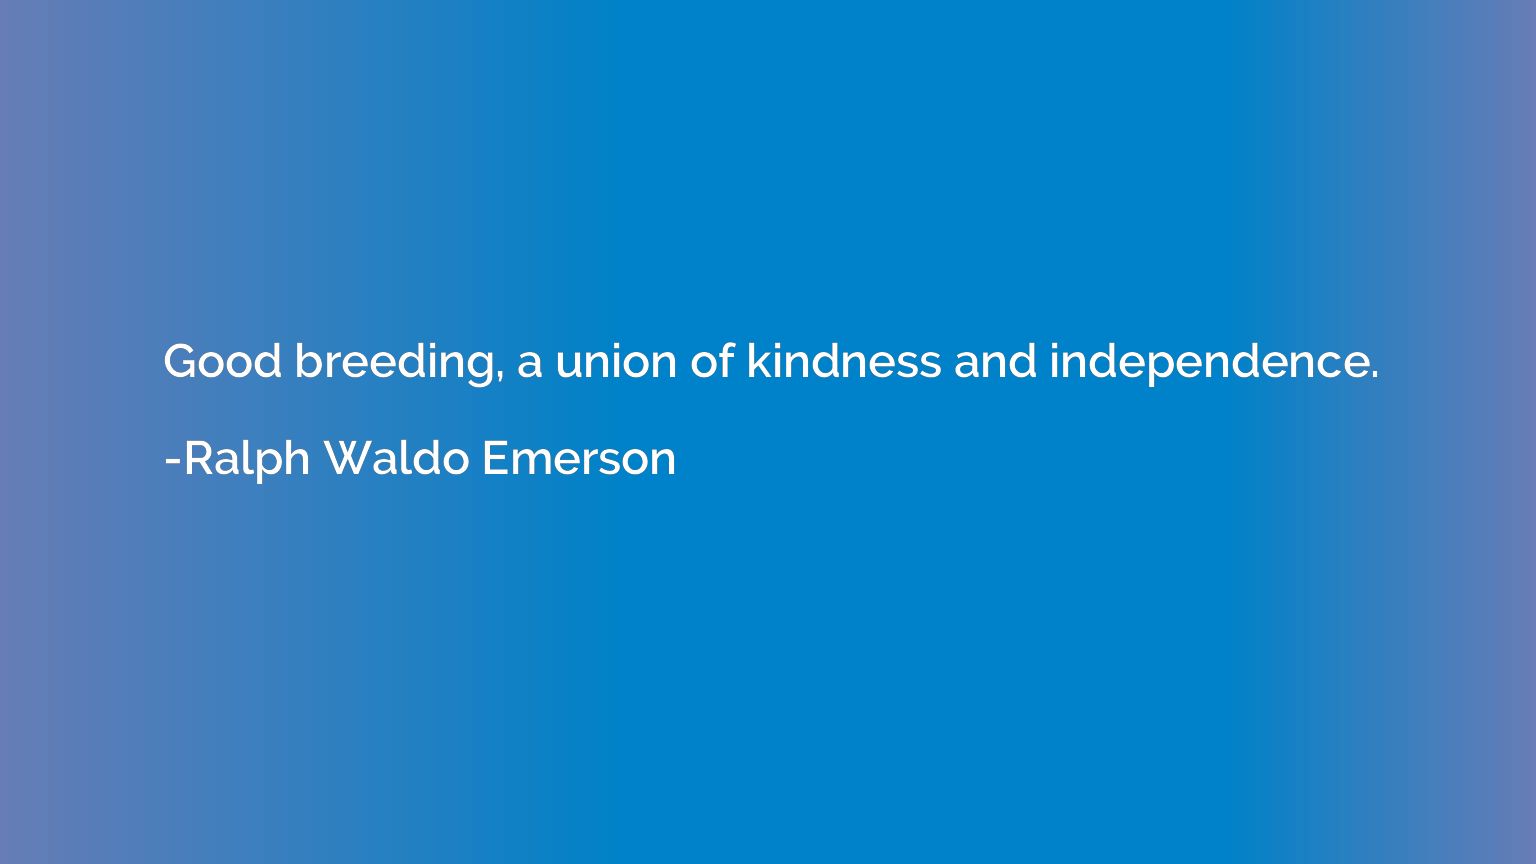 Good breeding, a union of kindness and independence.